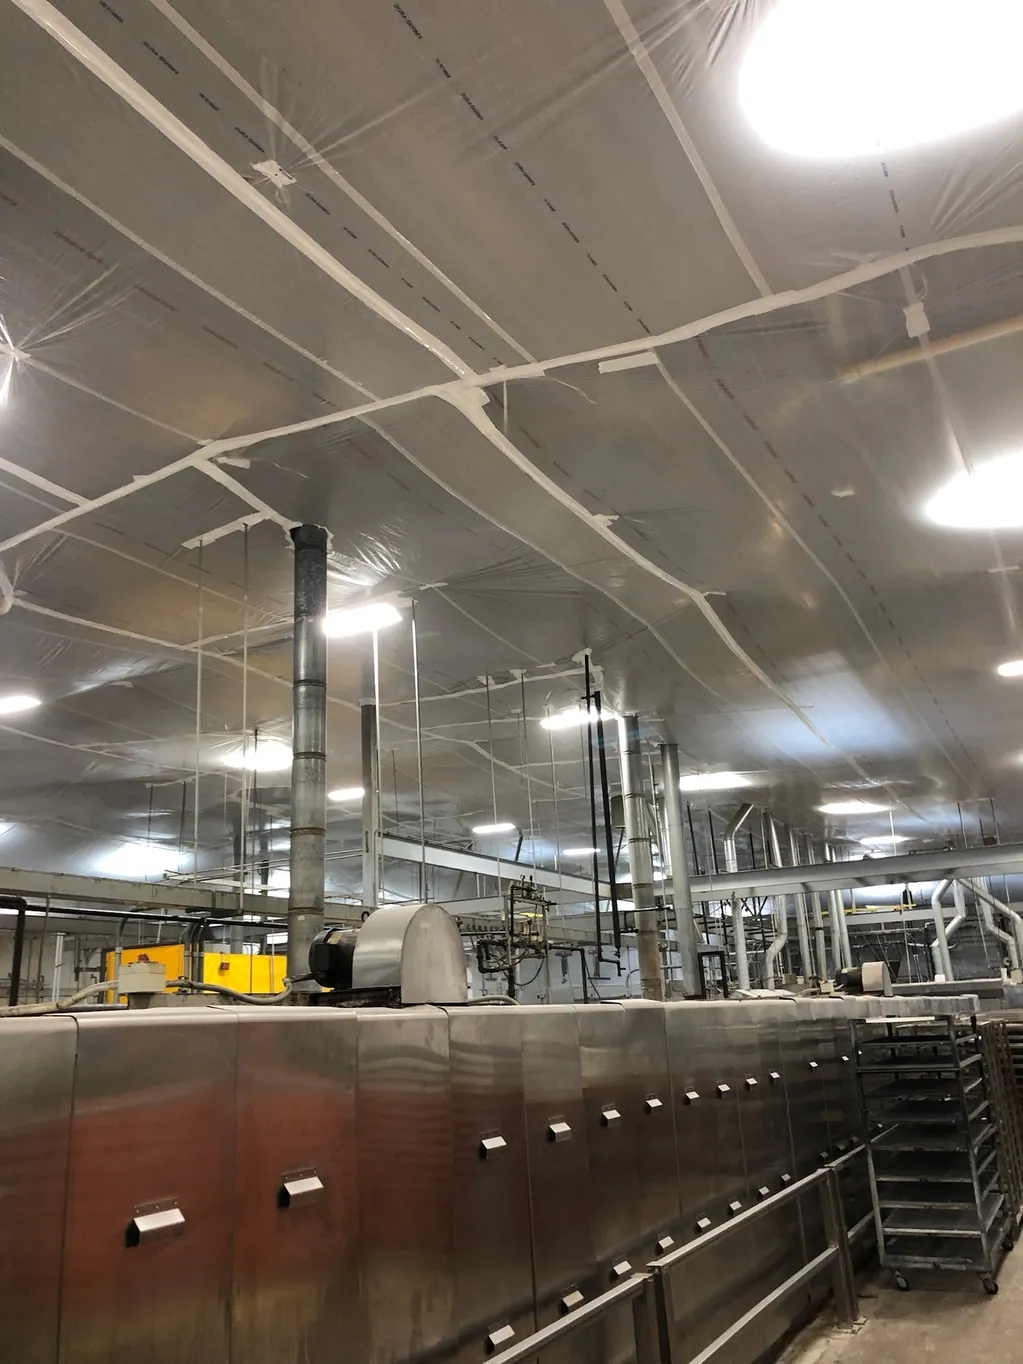 A manufacturing factory with temporary suspended ceiling covers